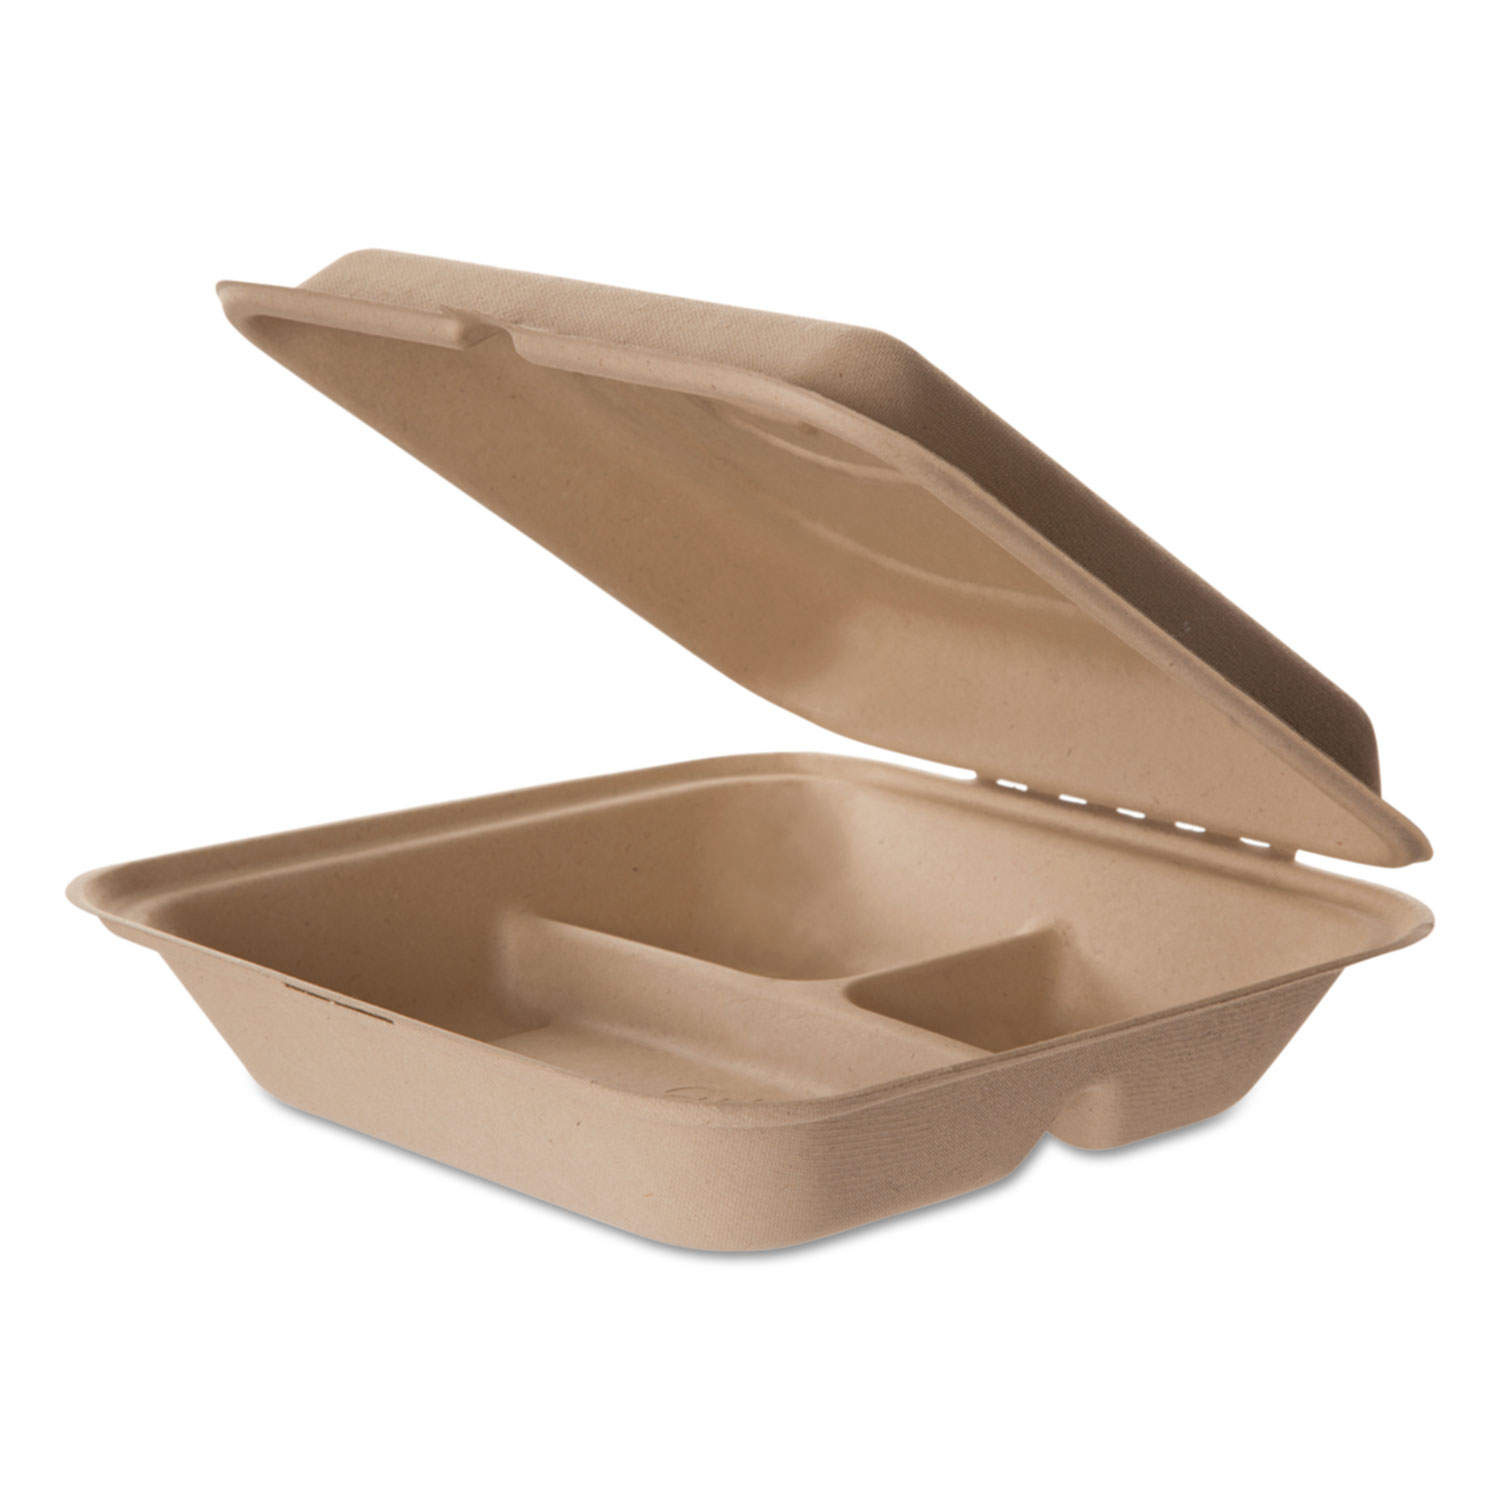 Wheat Straw Hinged Clamshell Containers, 9 x 9 x 3, 3-Comp, 200/Carton